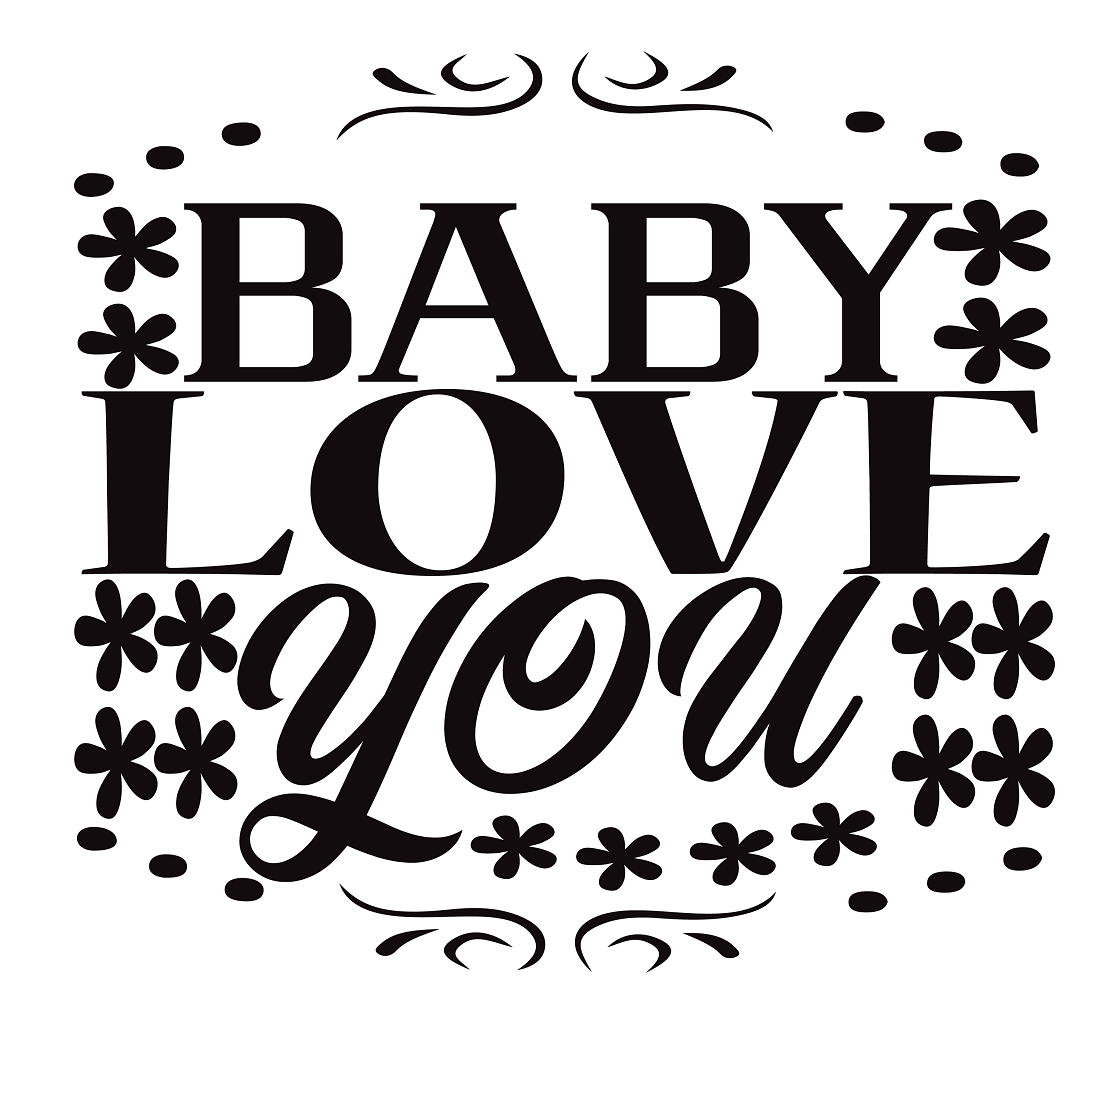 Baby Love You preview image.